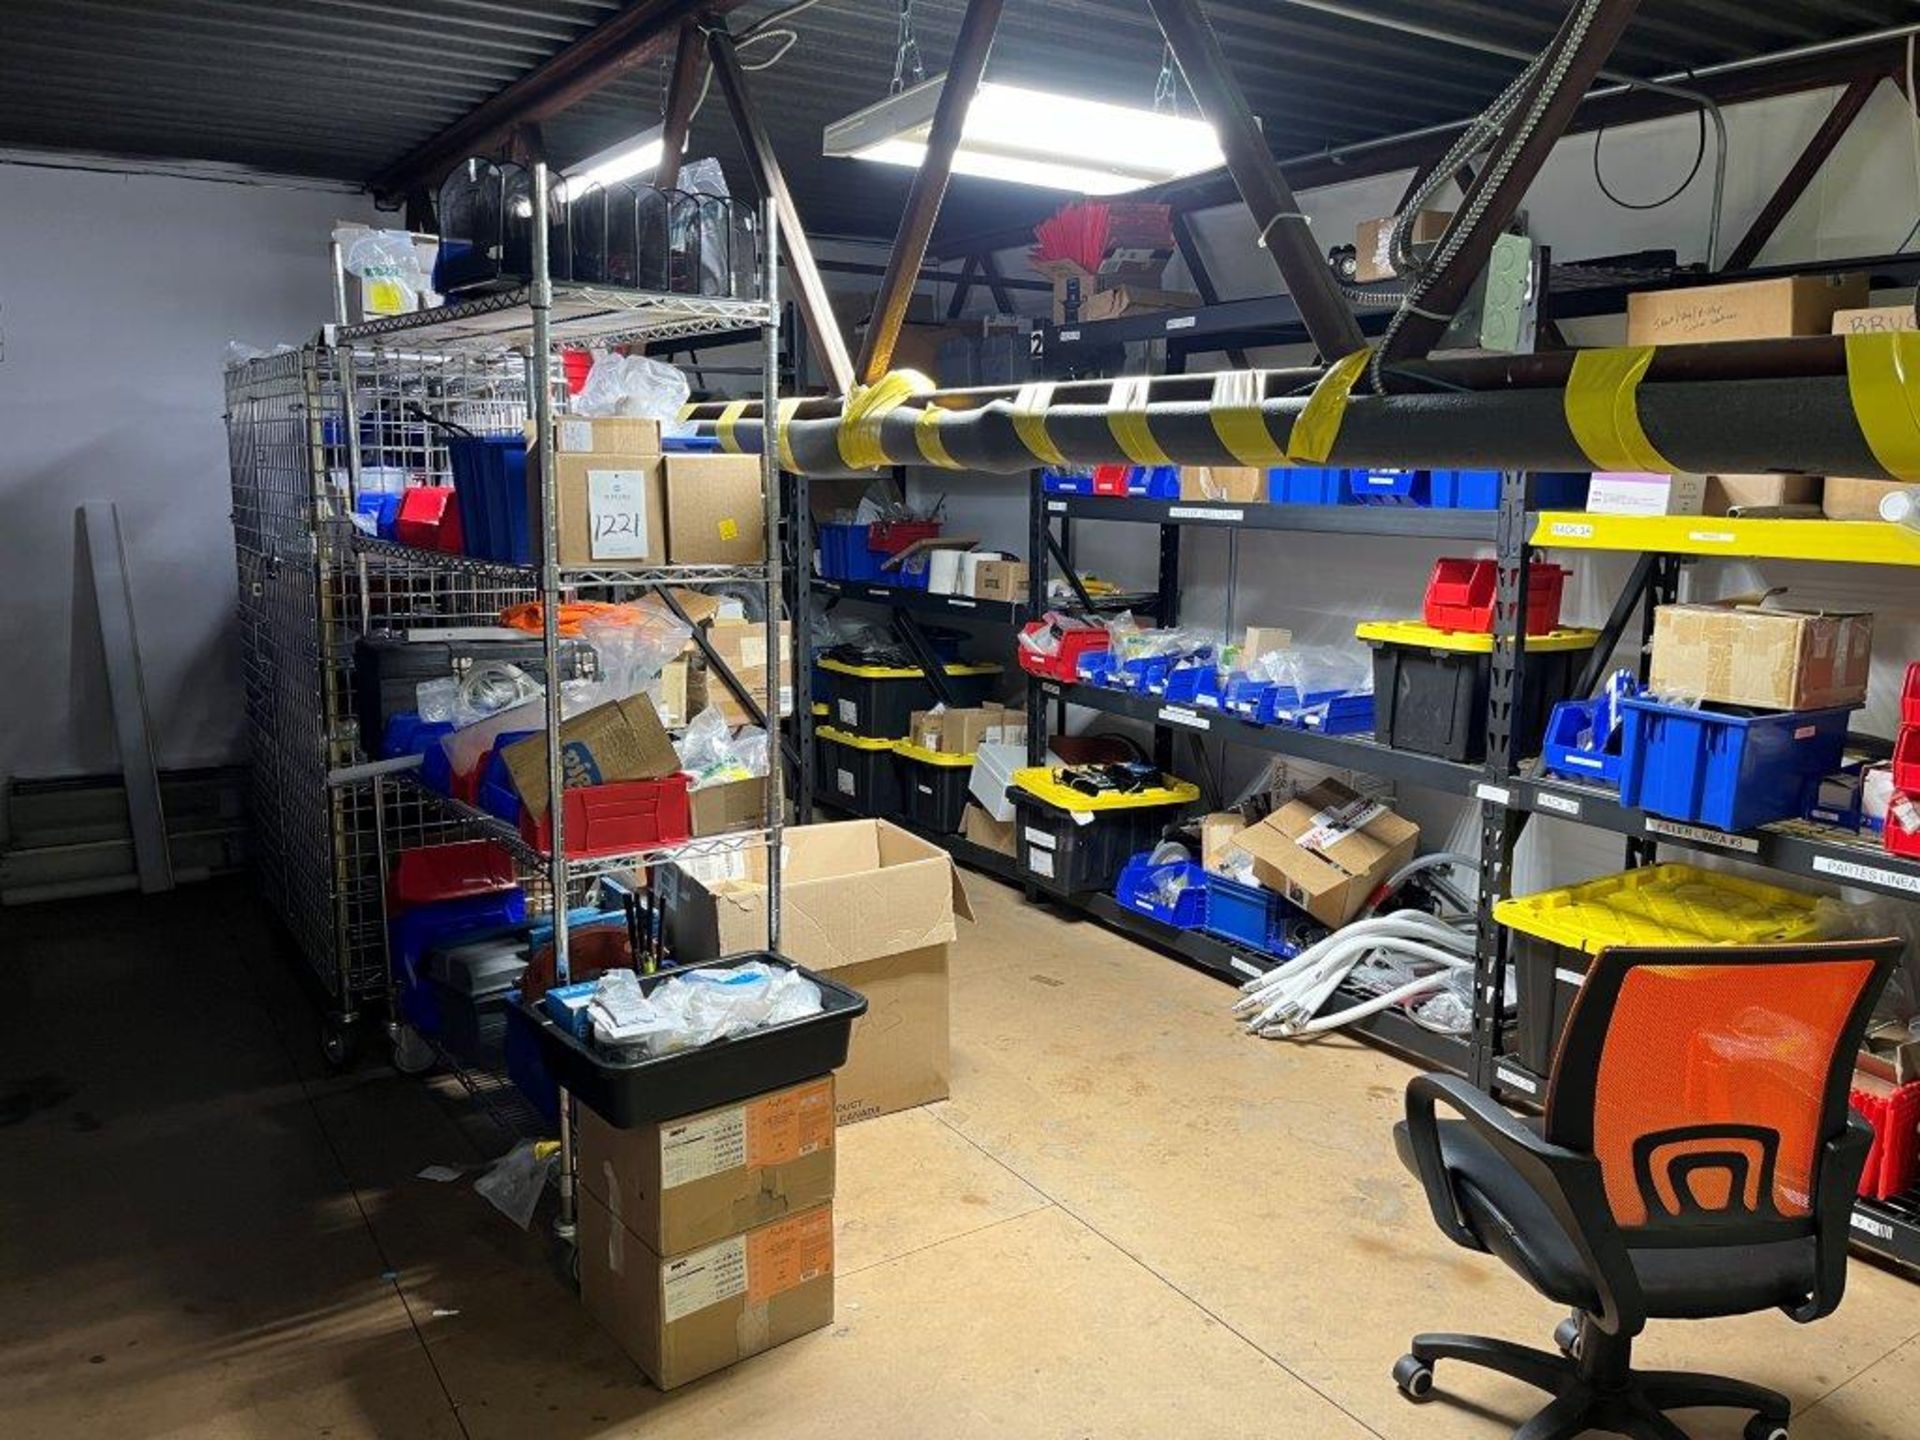 Contents of Maintenance Room and Mezzanine